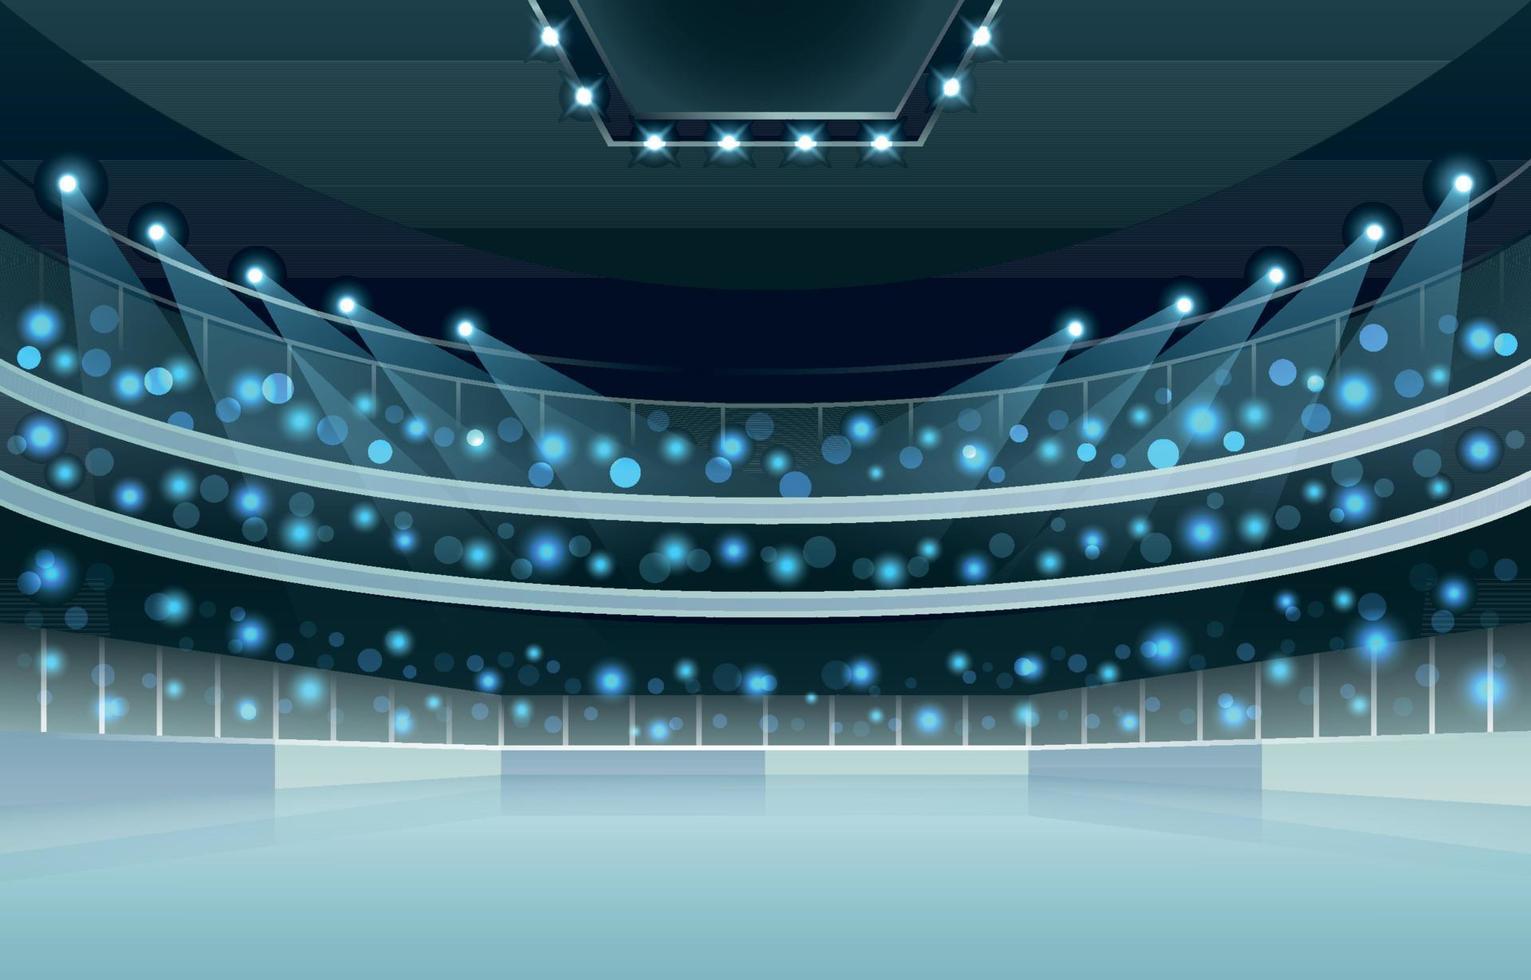 Ice Skating Rink Background vector